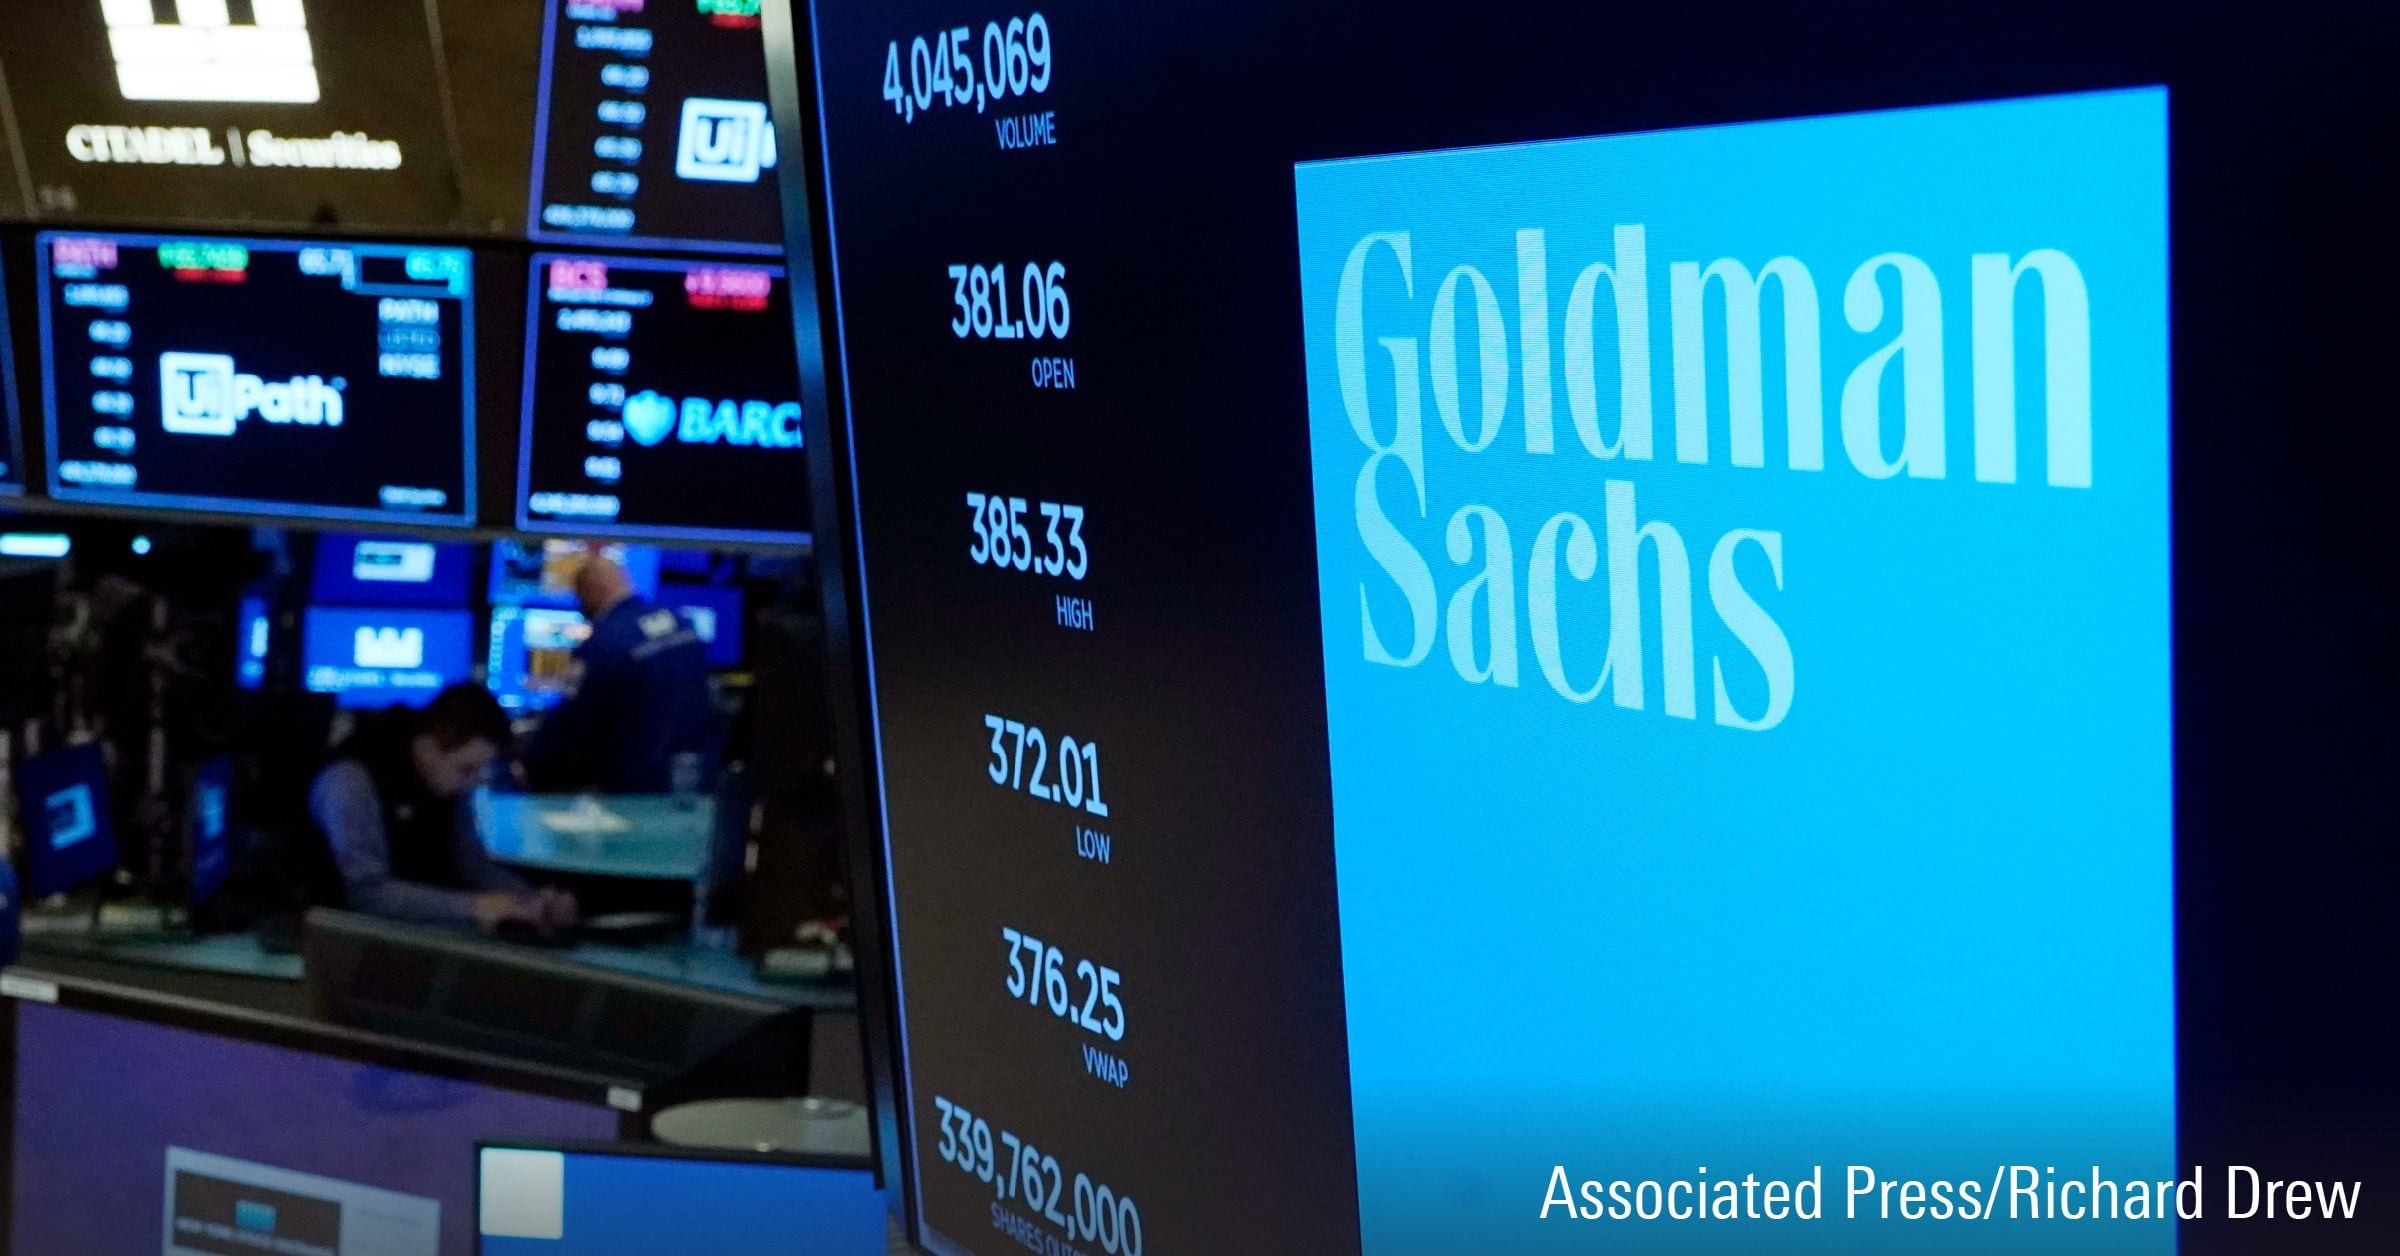 Goldman Sachs Earnings: Strong Start to Year as Investment Banking and Trading Power Results